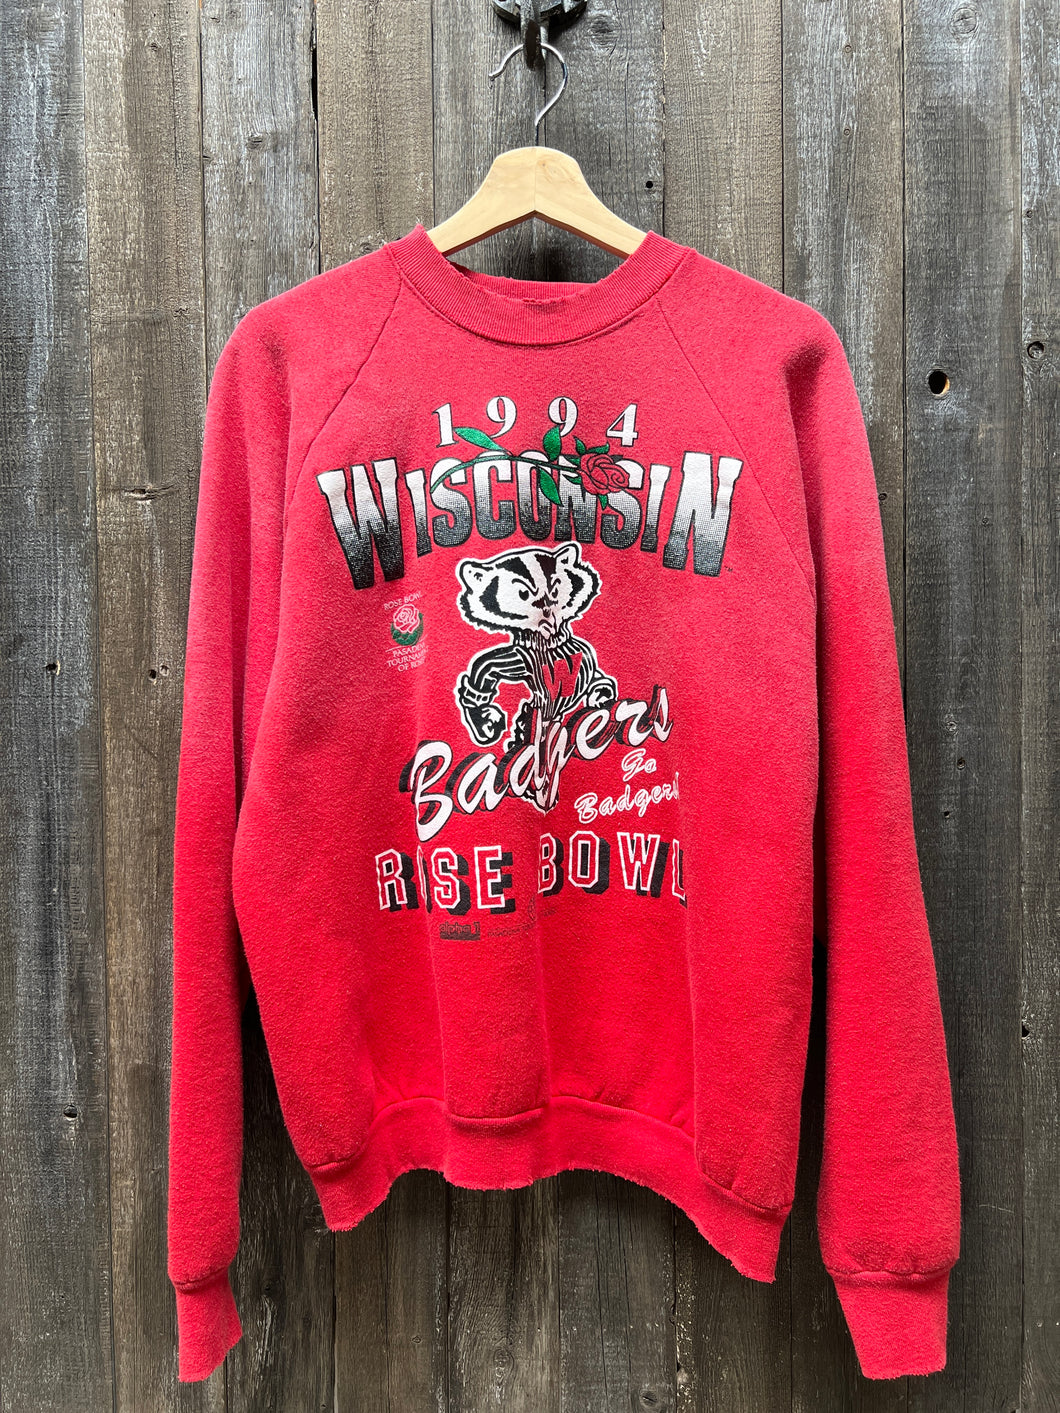 Wisconsin Sweatshirt -L-Customize Your Embroidery Wording